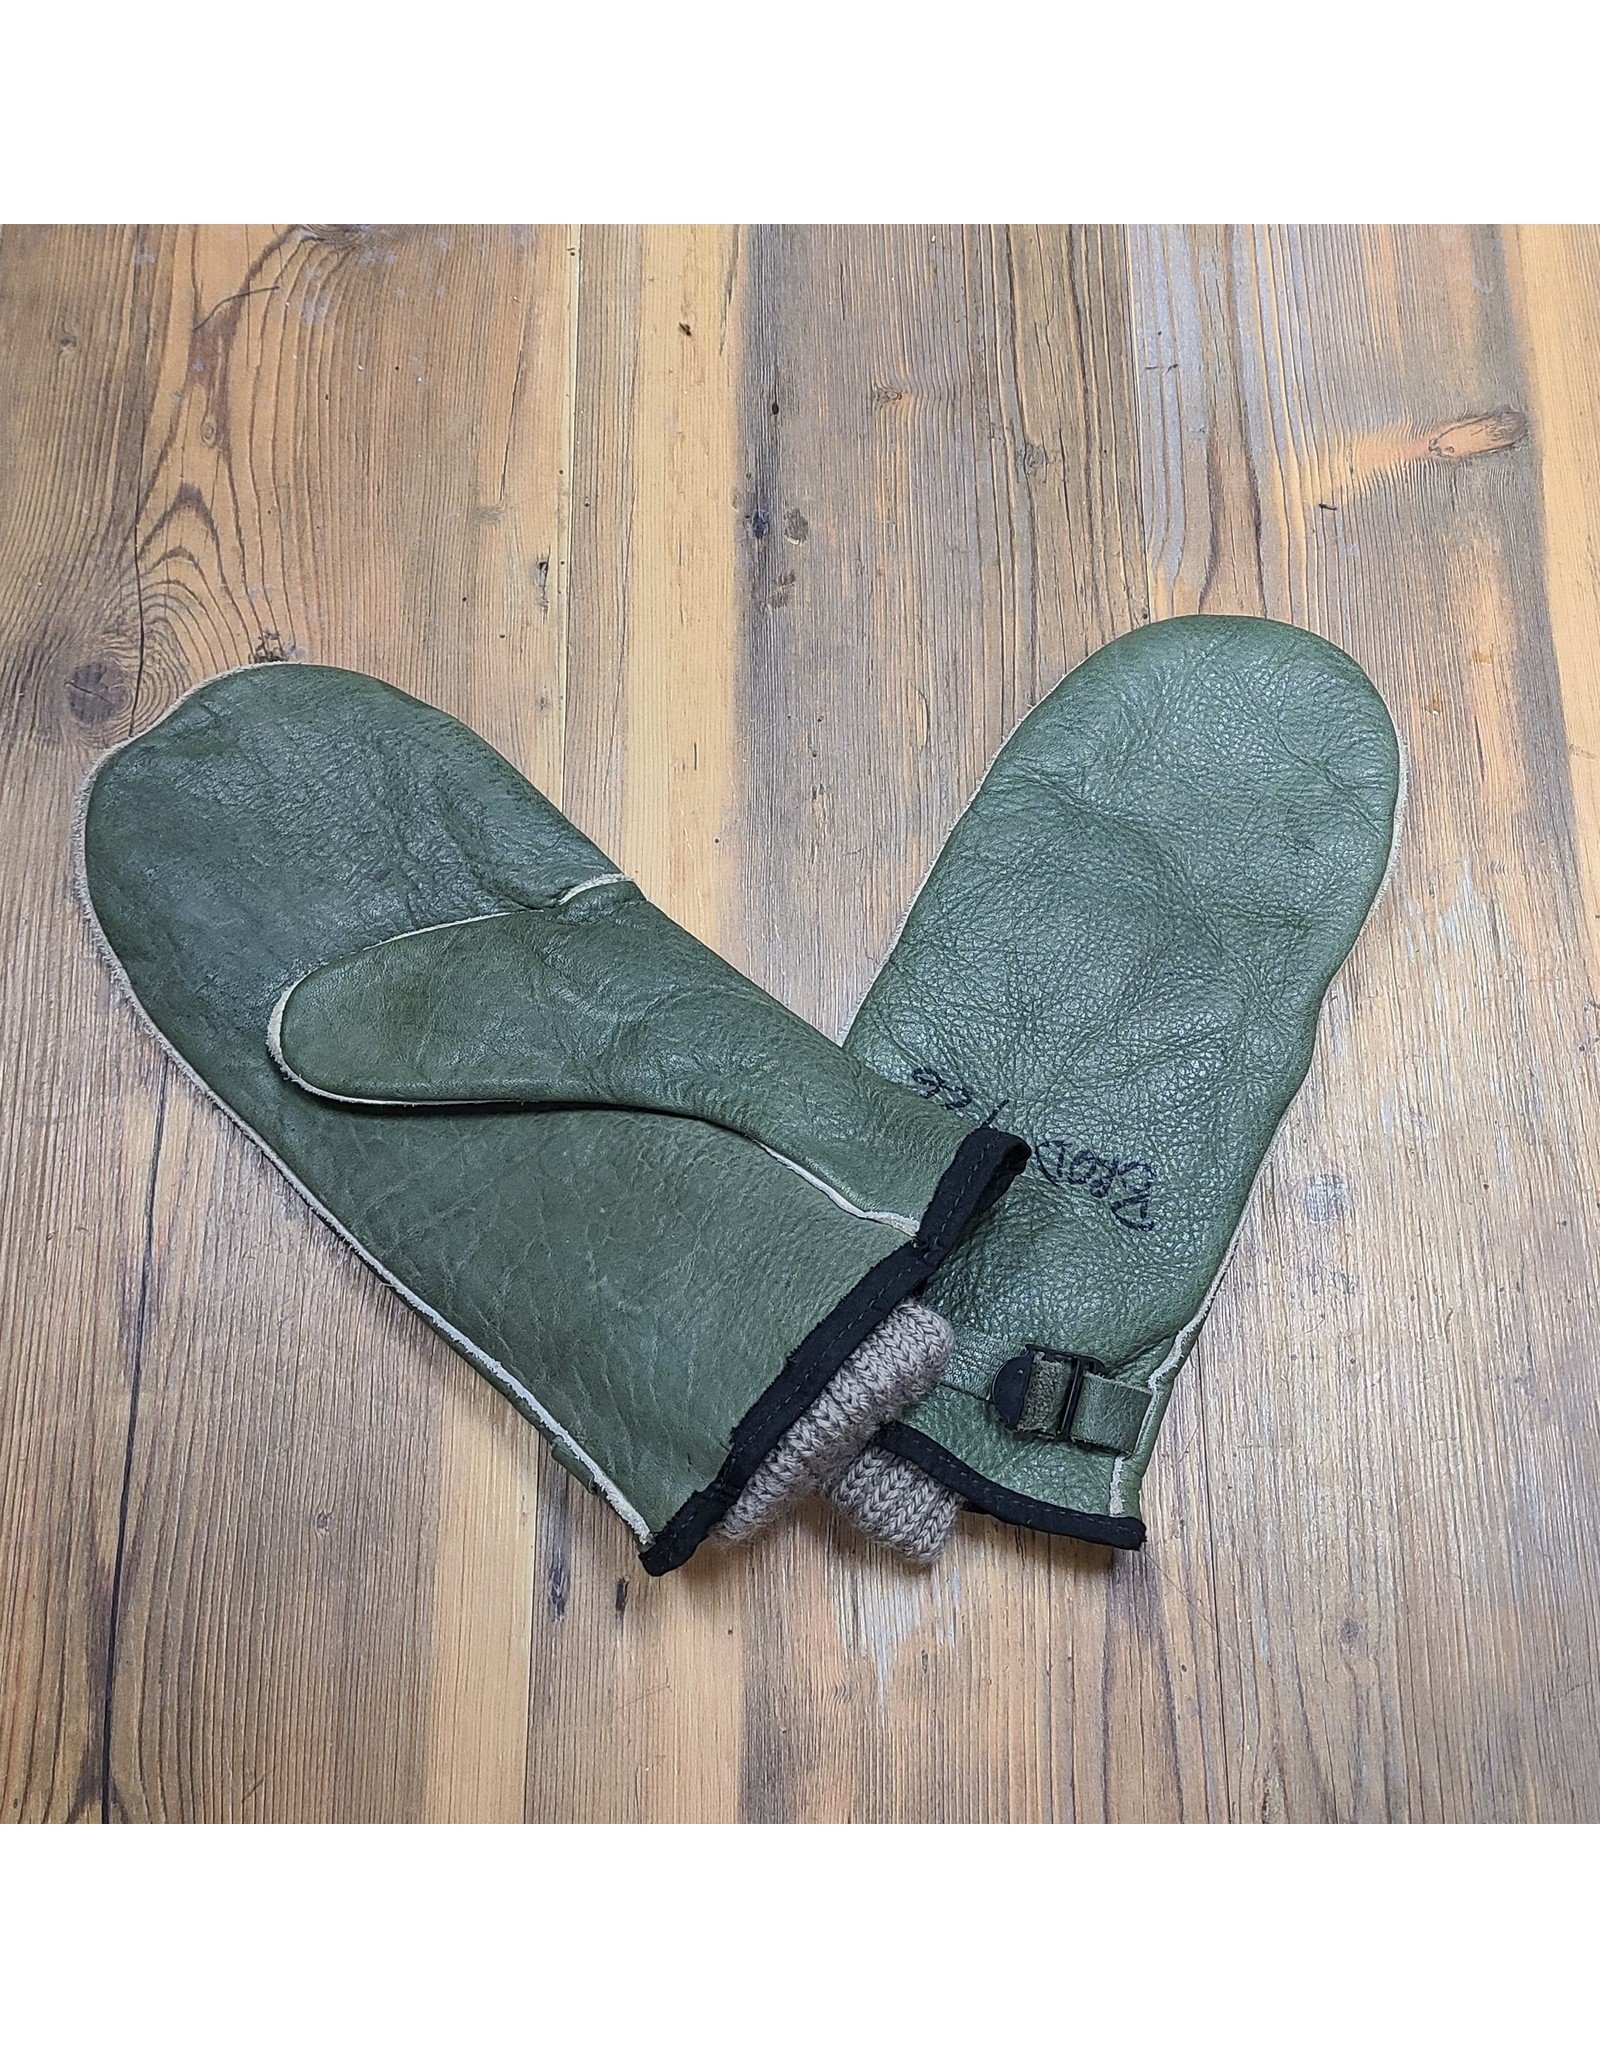 CANADIAN SURPLUS LEATHER MITTENS WITH WOOL LINER